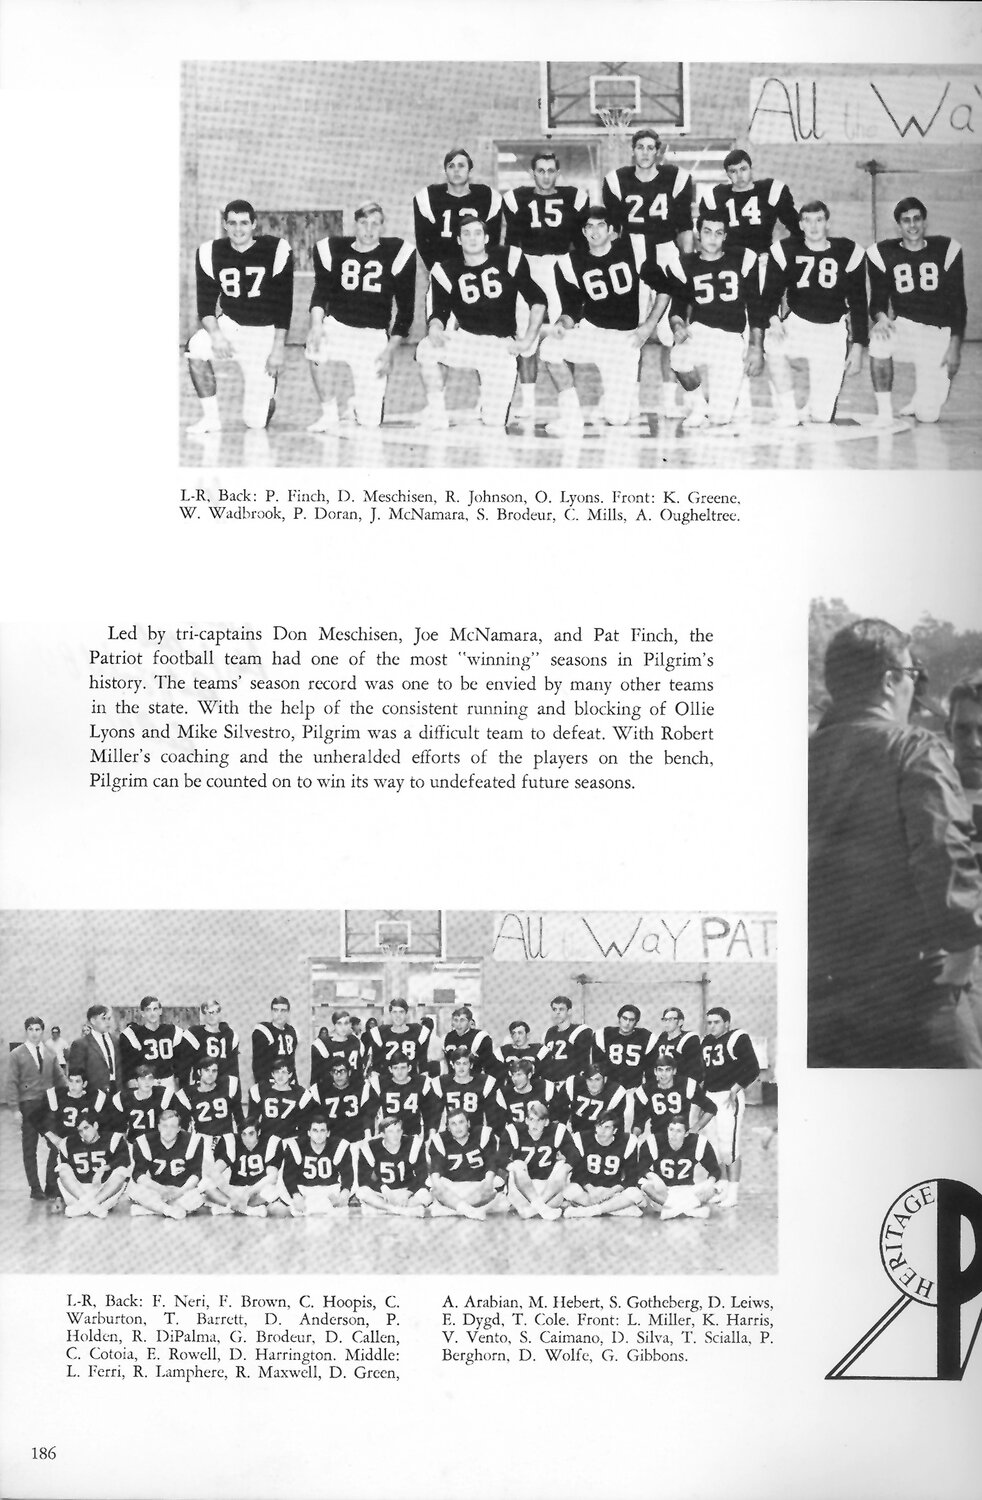 THE PILGRIM VARSITY FOOTBALL TEAM: Joe came up with his Pilgrim 1968 yearbook with this photo of the team. He is number 60 in the first row of players.